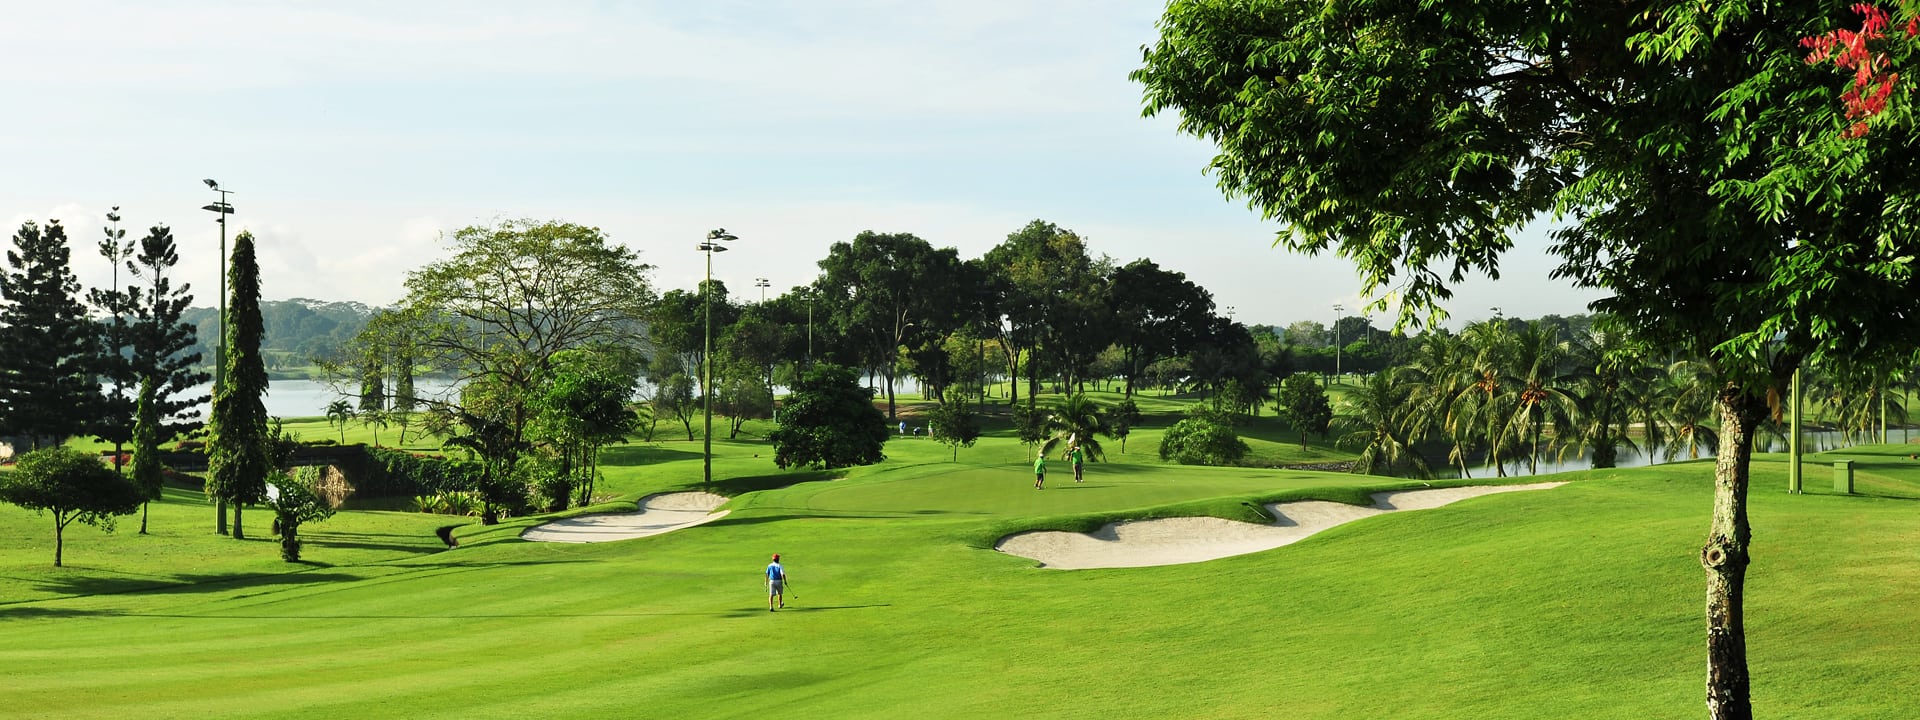 Golf course at the Orchid Country Club